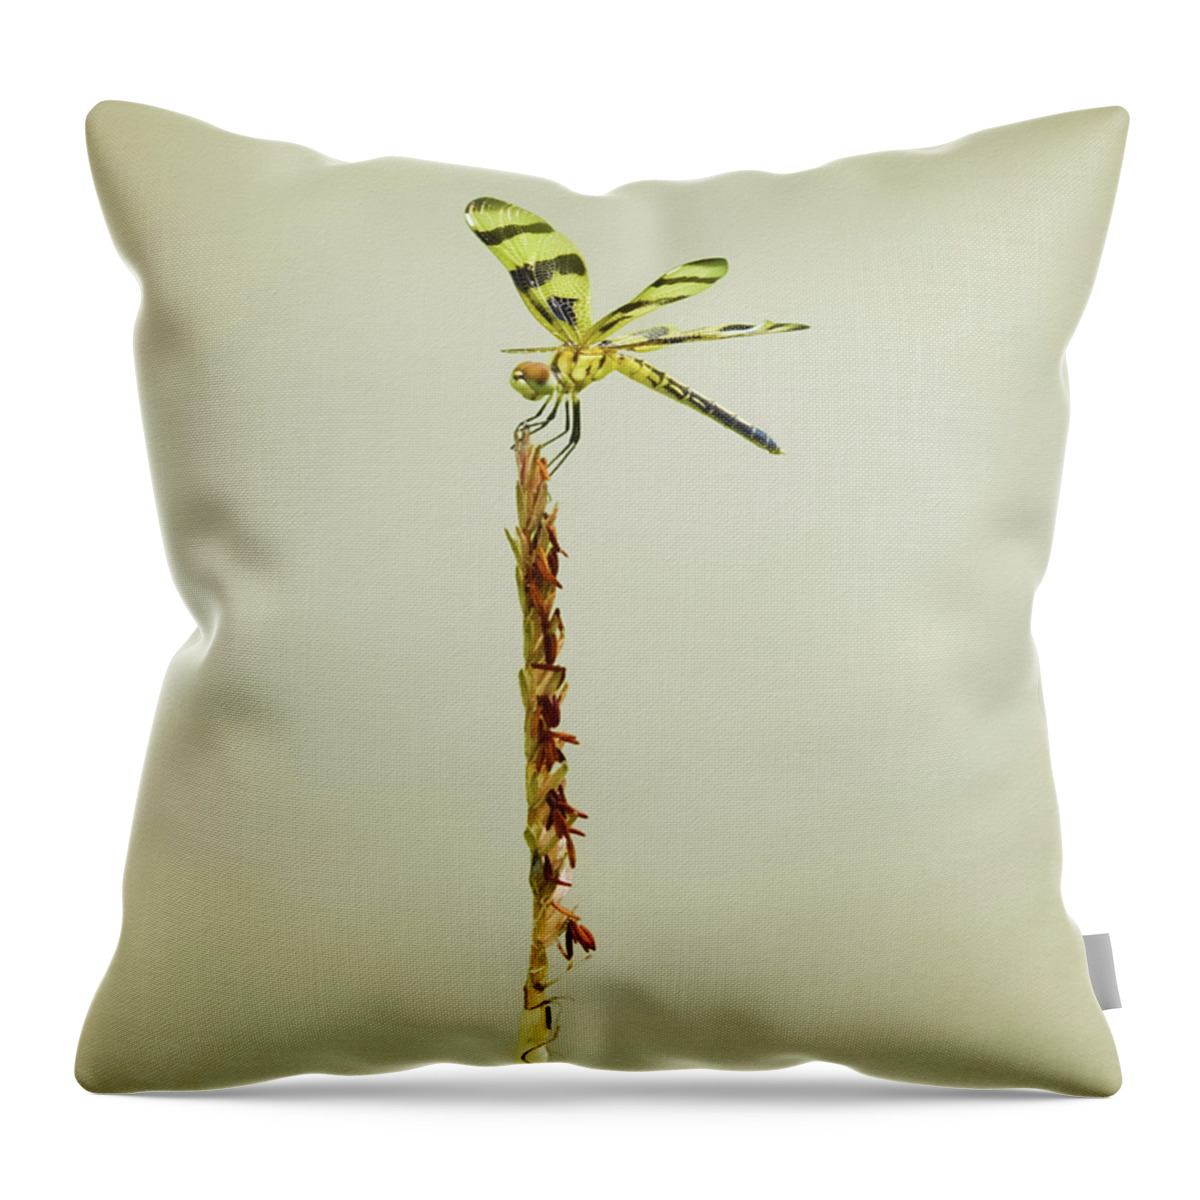 Dragonfly Throw Pillow featuring the photograph Calico Pennant Dragonflies by Steven Michael